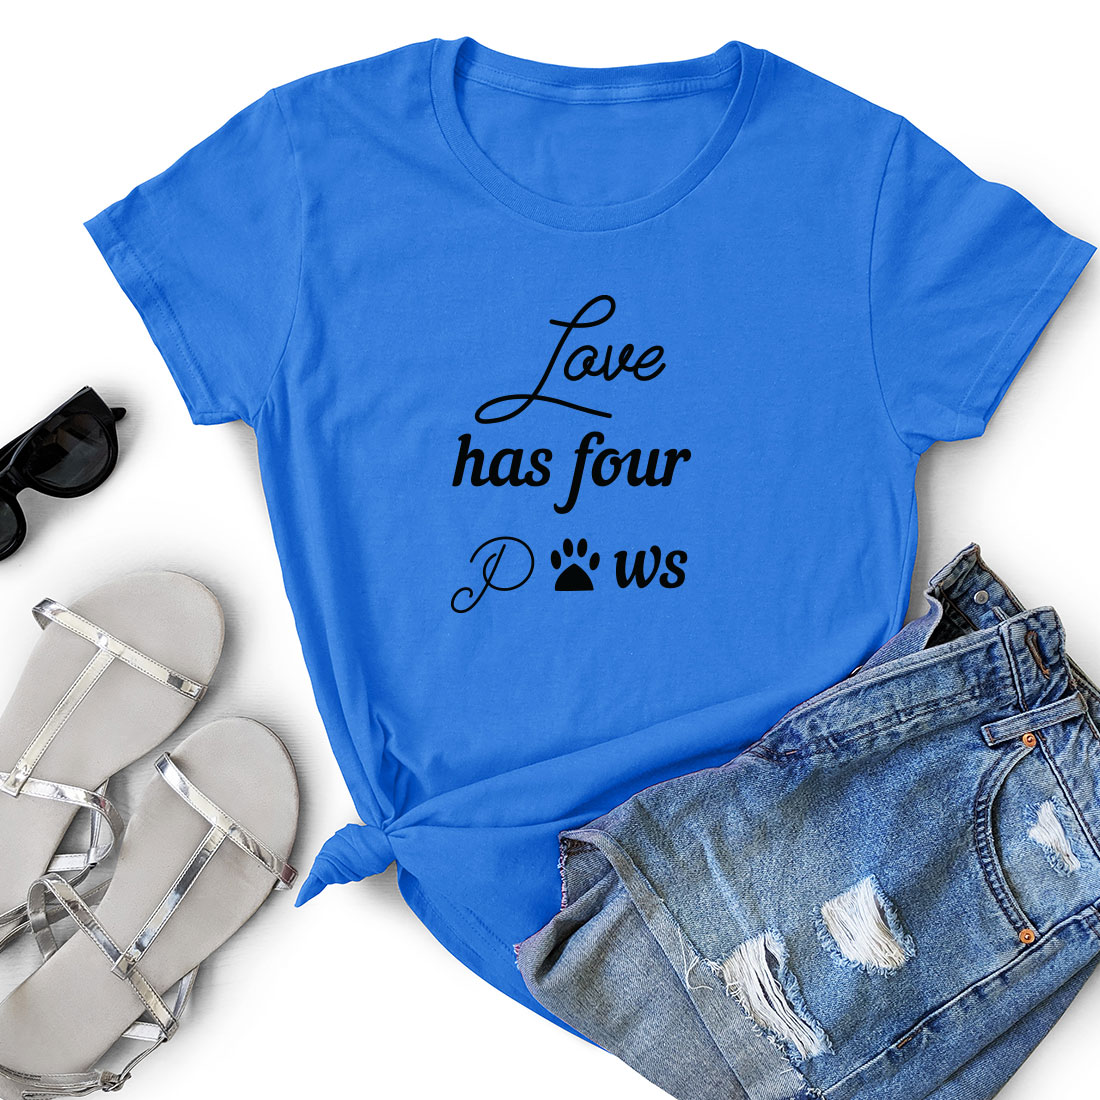 T - shirt that says love has four paws.